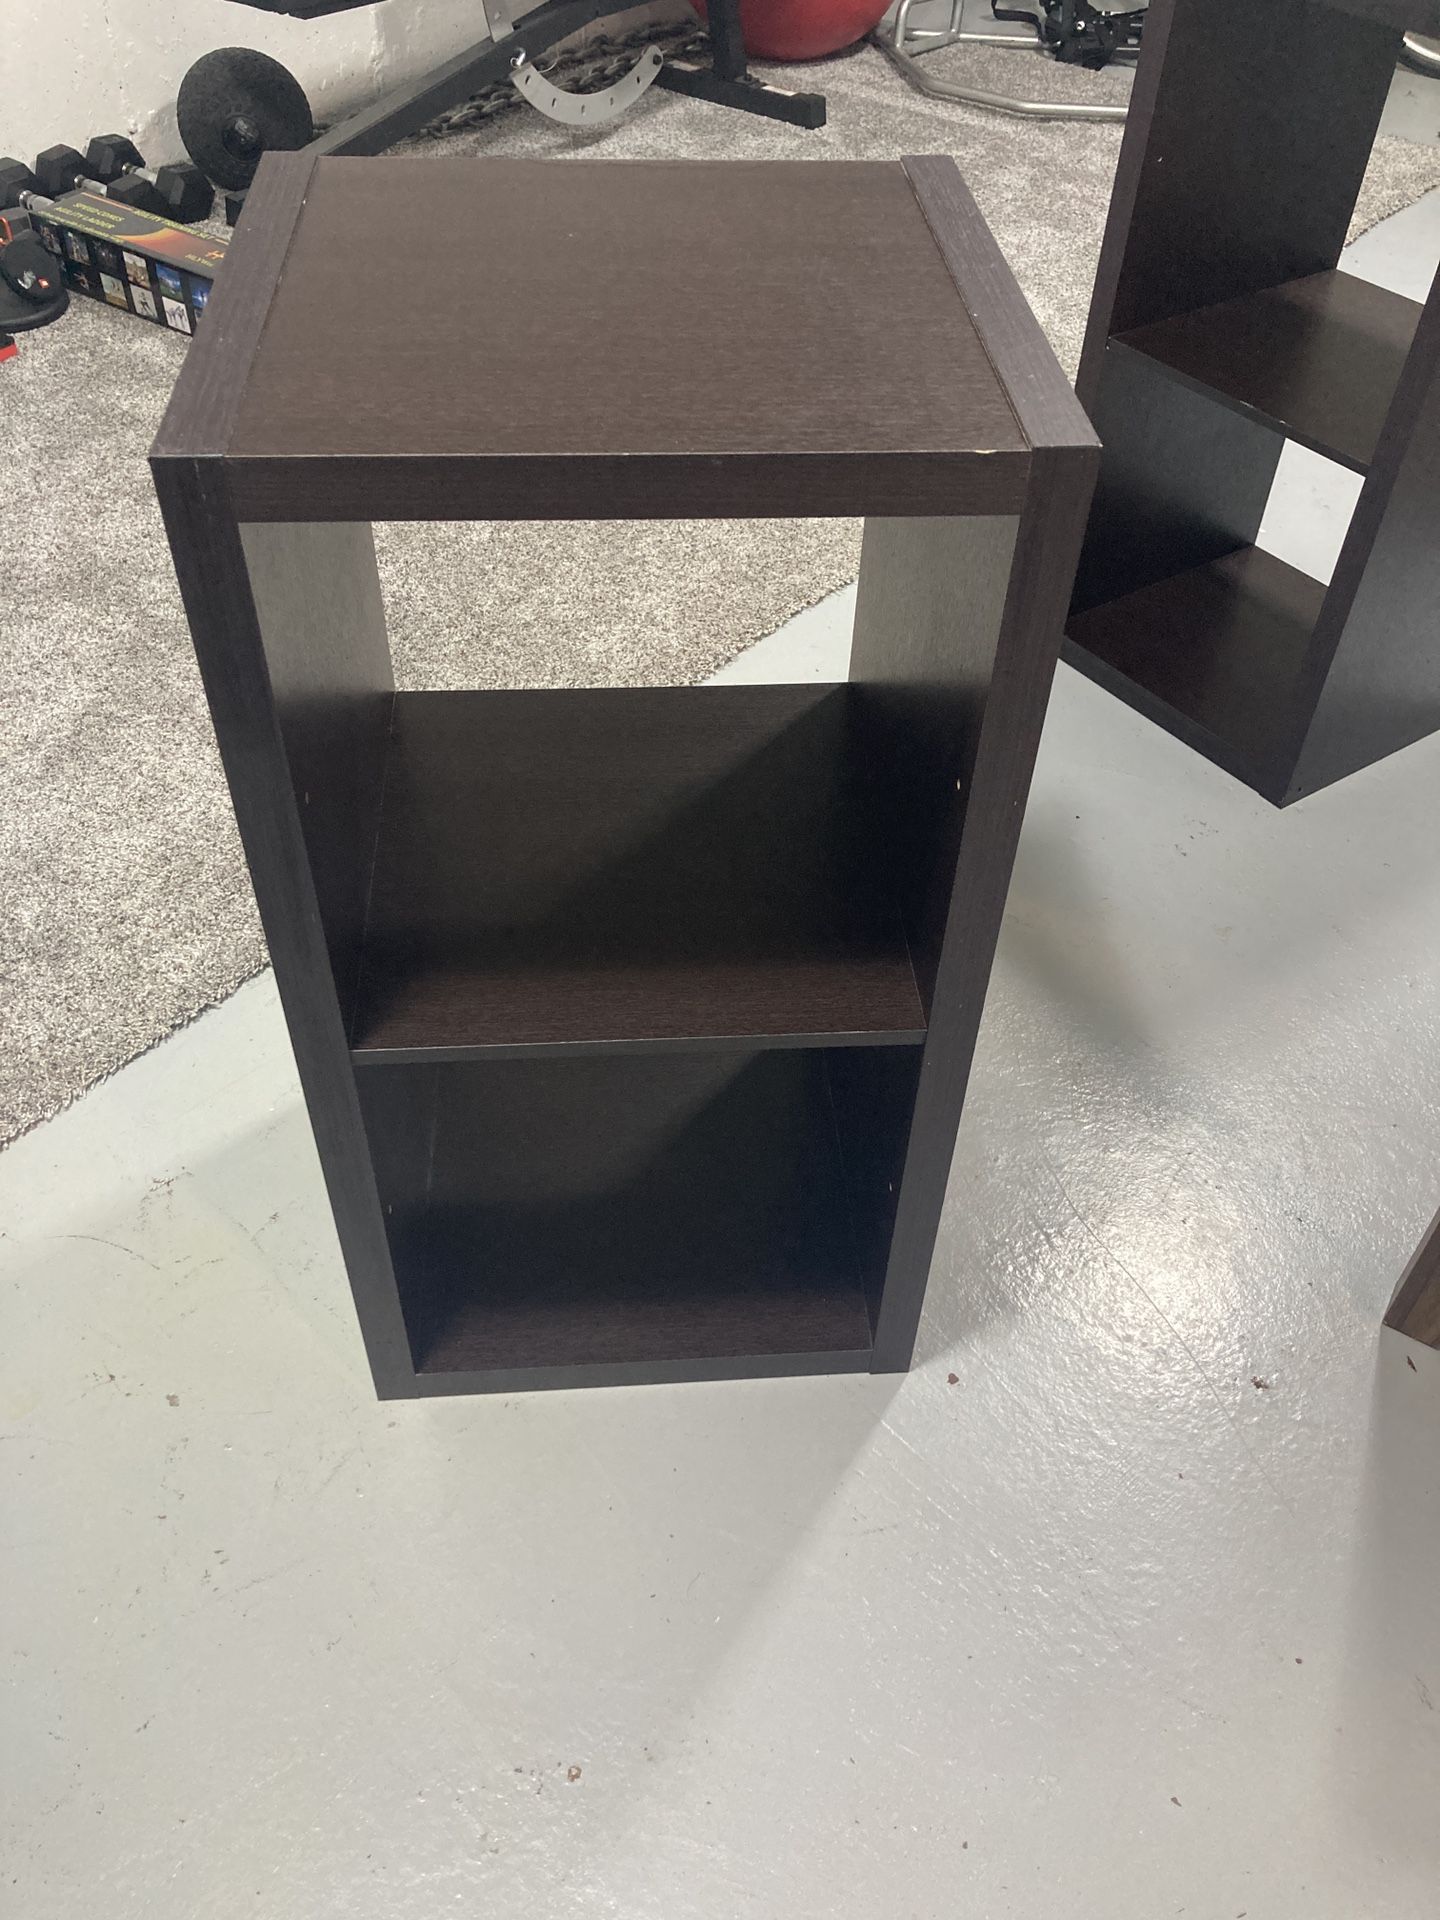 Wood Brown Cubby (Open On Both Sides) 